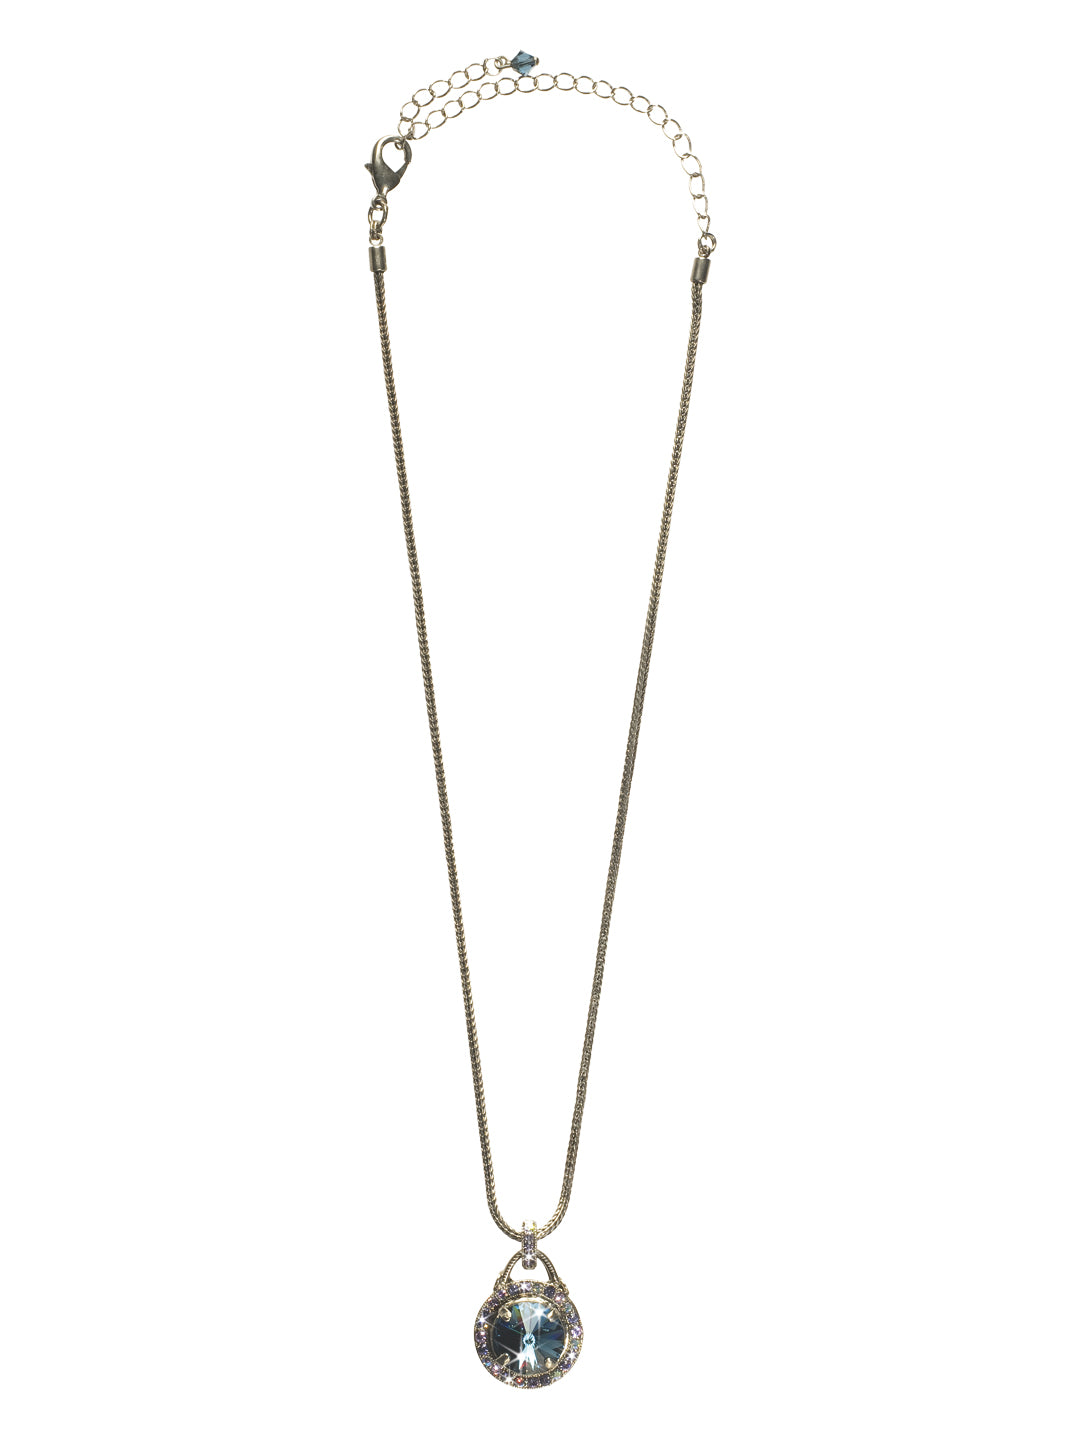 Simple Elegance Necklace - NCM20ASHY - Lock in your style! A large circle-cut crystal encased in sparkle dangles from a slick fishtail chain. Add style to any outfit with this simple, elegant pendant necklace. From Sorrelli's Hydrangea collection in our Antique Silver-tone finish.